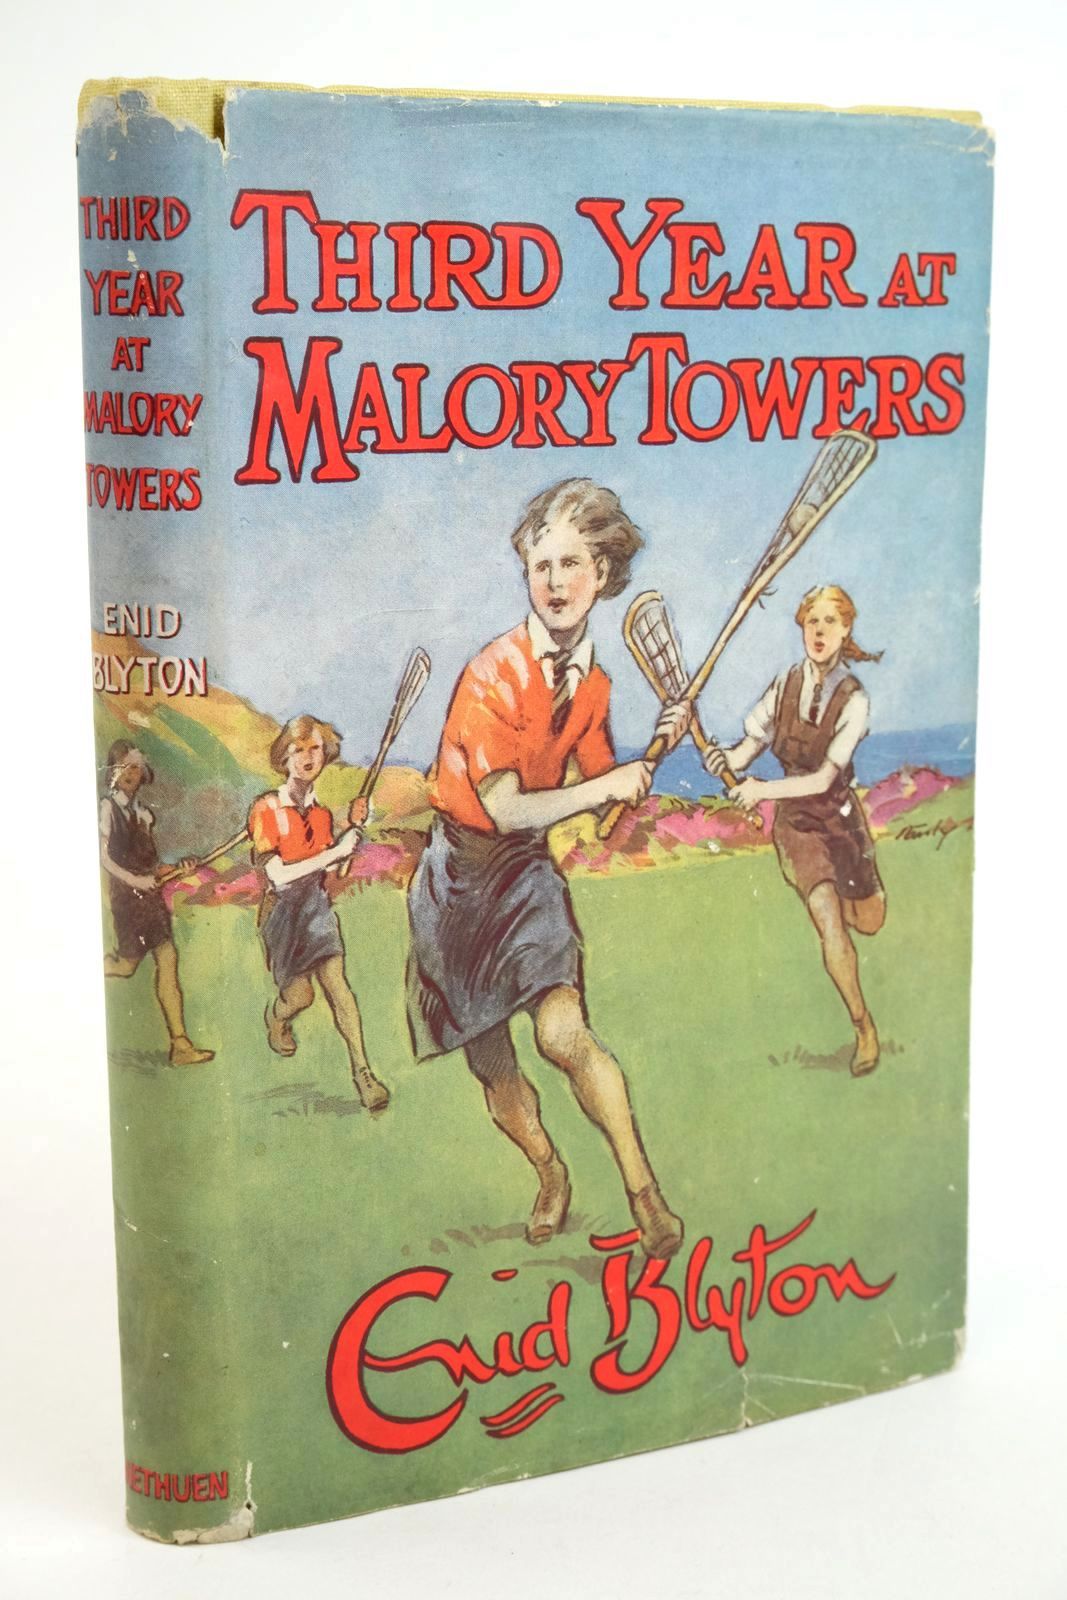 Photo of THIRD YEAR AT MALORY TOWERS written by Blyton, Enid illustrated by Lloyd, Stanley published by Methuen &amp; Co. Ltd. (STOCK CODE: 1322079)  for sale by Stella & Rose's Books